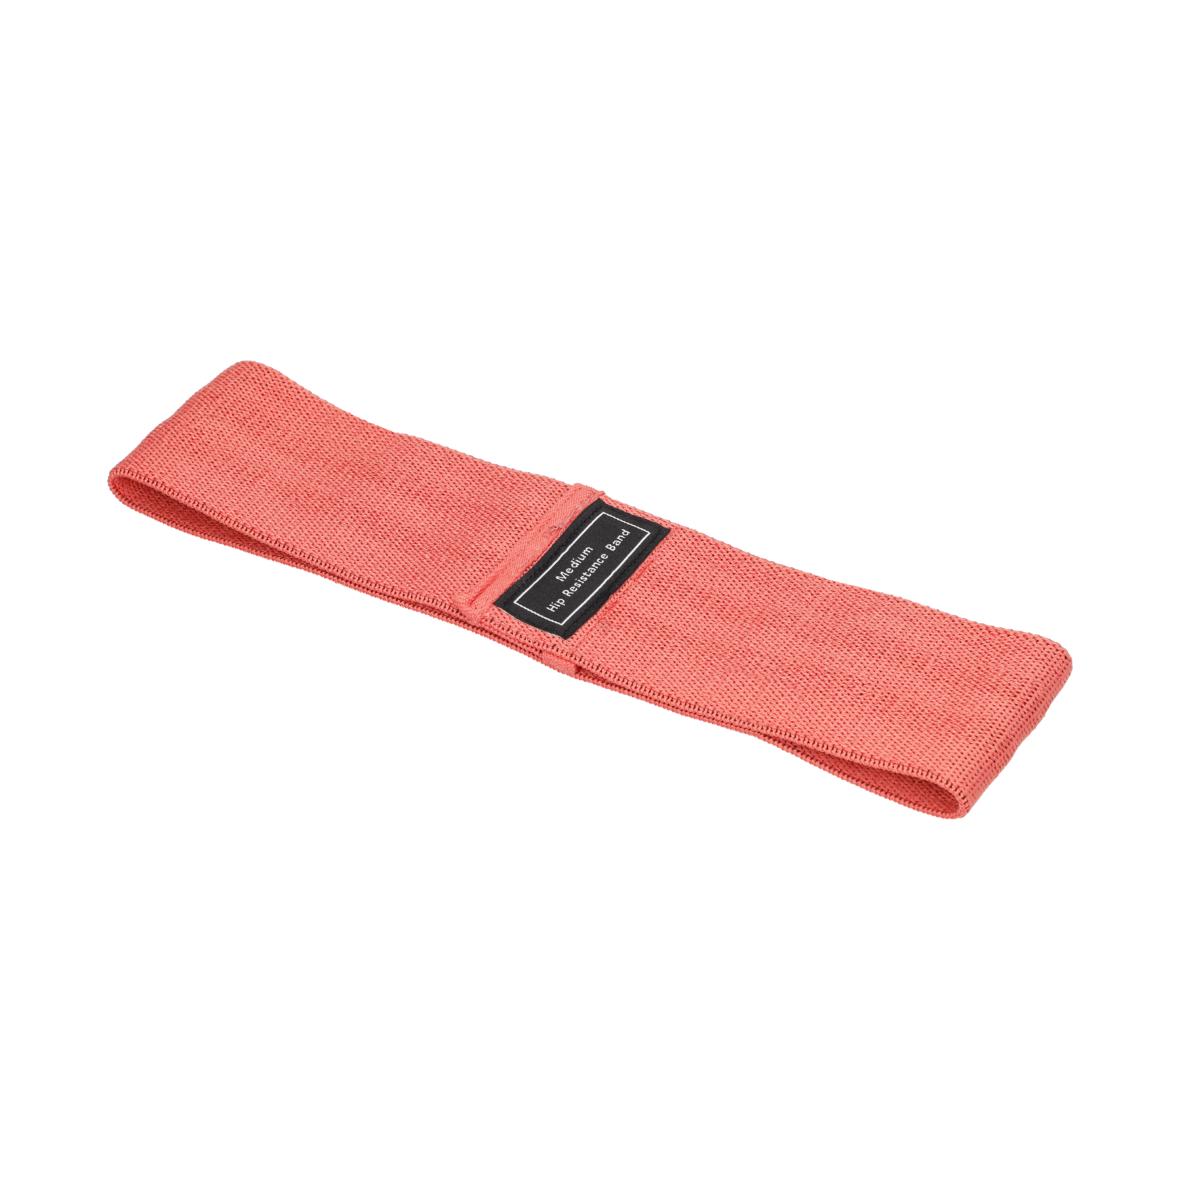 High-Quality Exercise Resistance Band - Ambleside